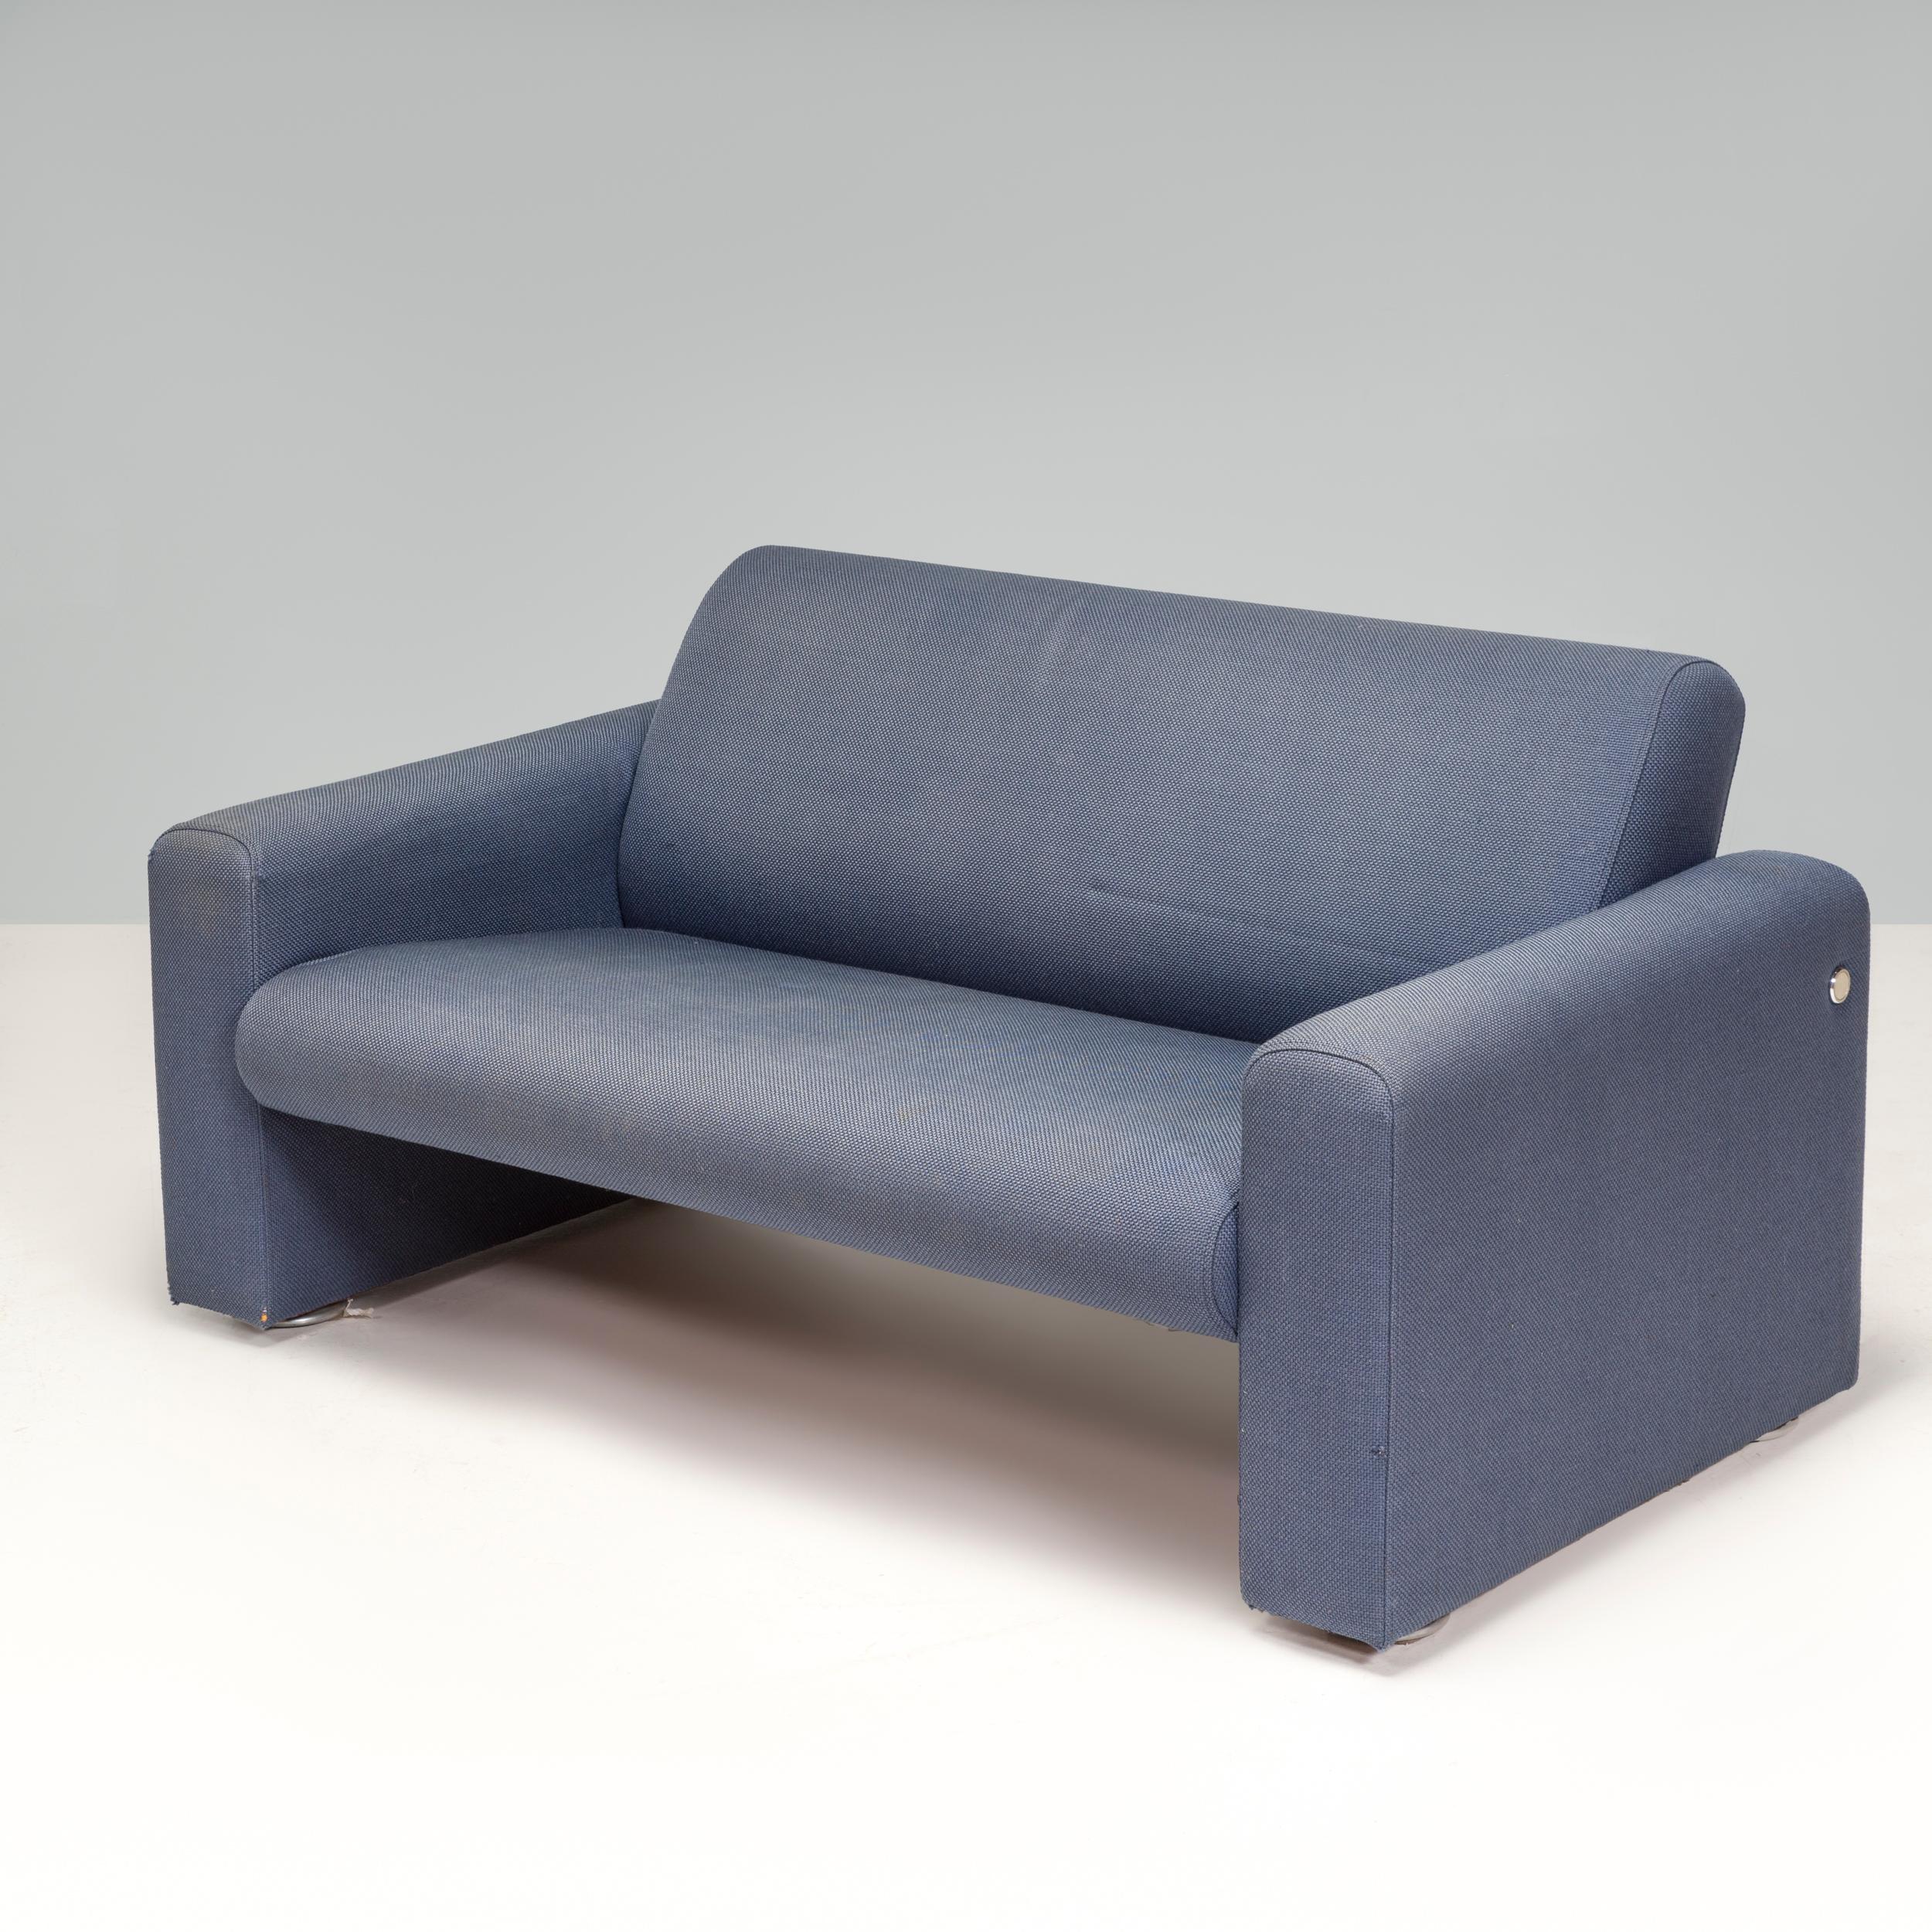 Originally designed by the Artifort design group in 1987, the 691 sofa has been in production ever since making it a true classic of the collection.

Fully upholstered in a blue-grey coloured fabric, the sofa has a sleek a sophisticated aesthetic